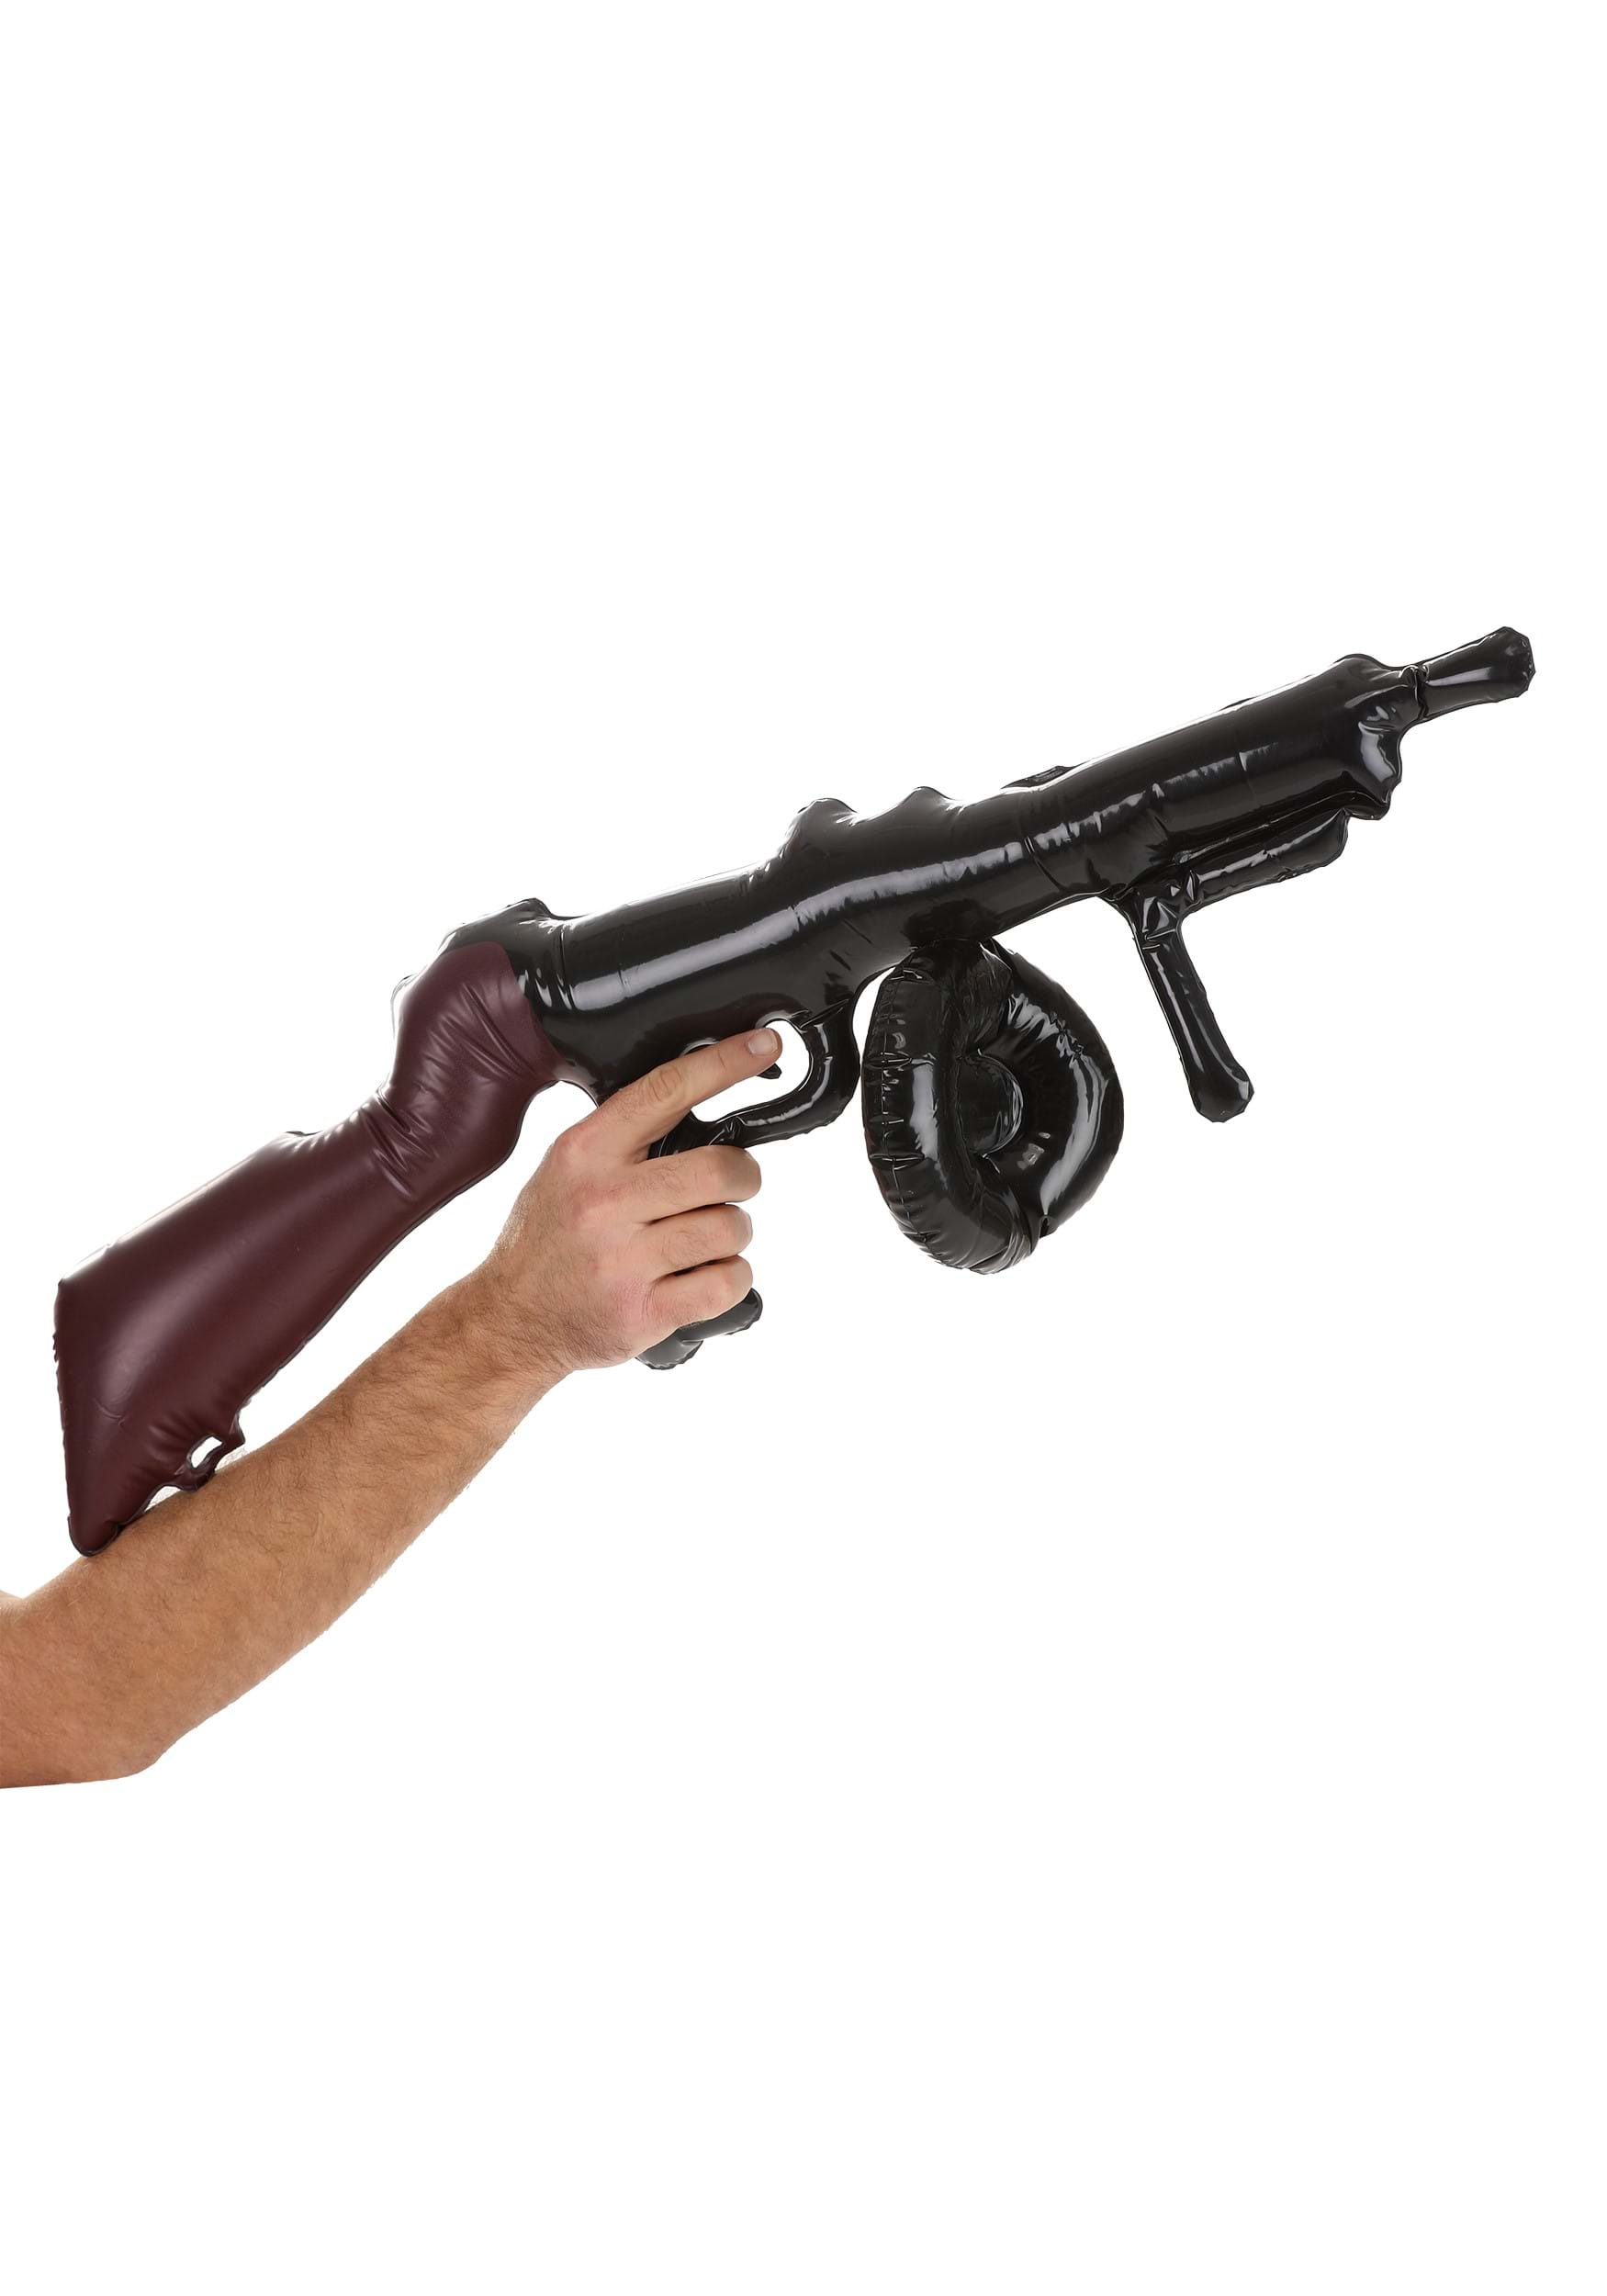 https://images.halloweencostumes.com/products/87554/2-1-264988/inflatable-toy-gun-alt-1.jpg